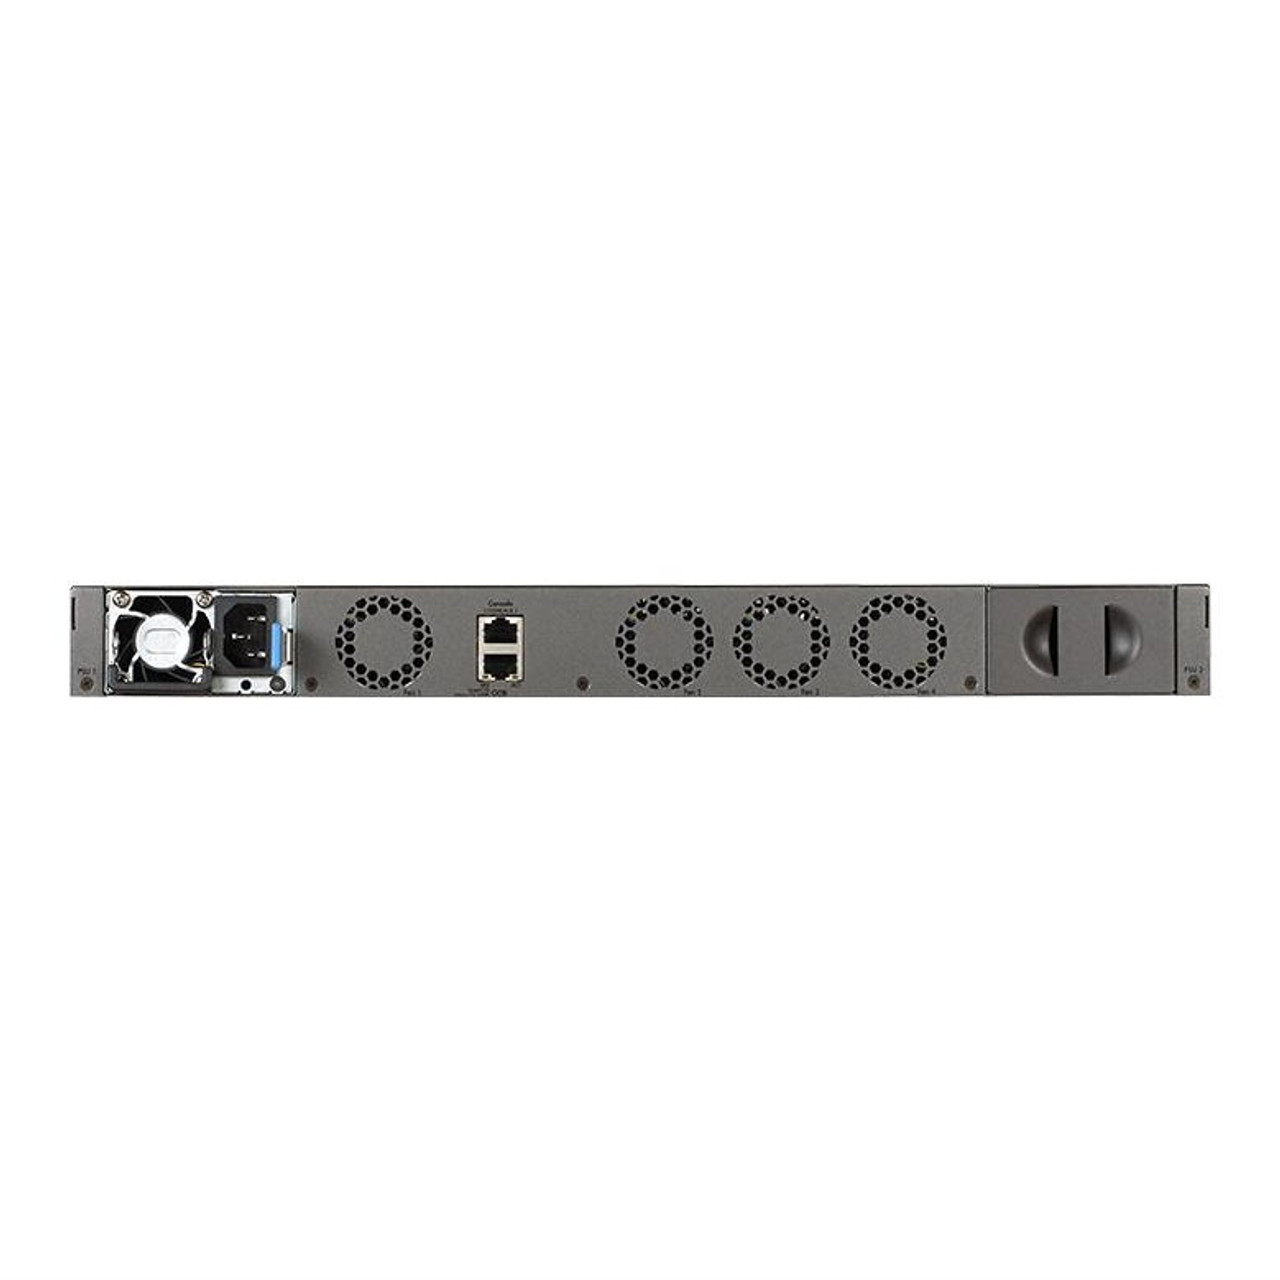 Netgear M4300-48X 48x10G Layer 3 Stackable Managed Switch with 4x10G SFP